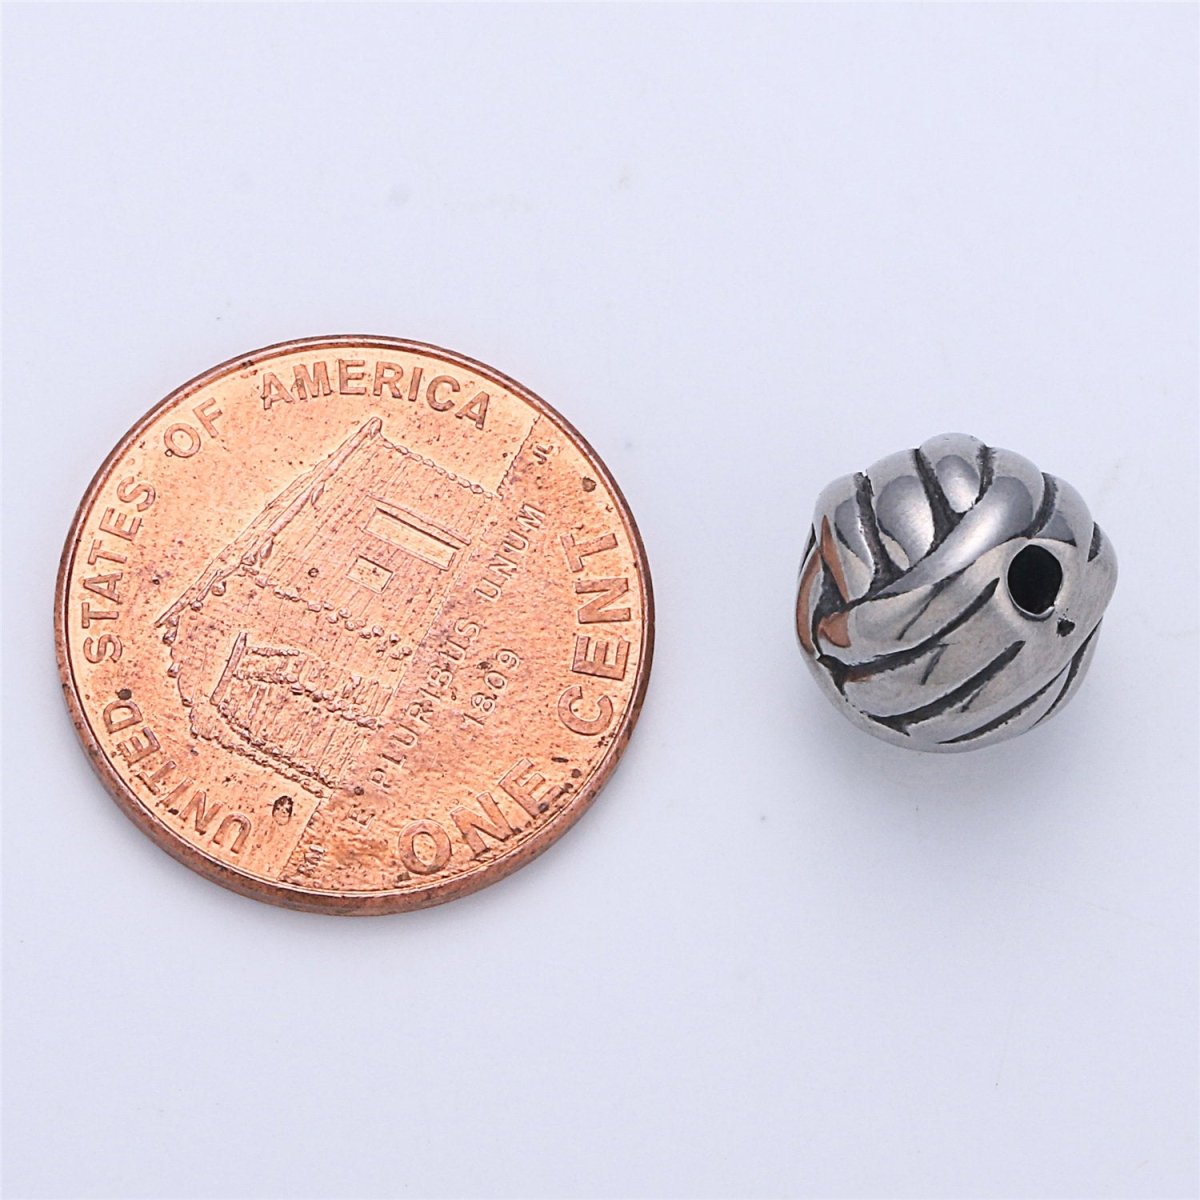 Stainless Steel Volleyball Training Charm Spacer Bead, for DIY Jewelry Making European Charms Beaded Bracelet, Bead Size 10x10mm B-429 - DLUXCA